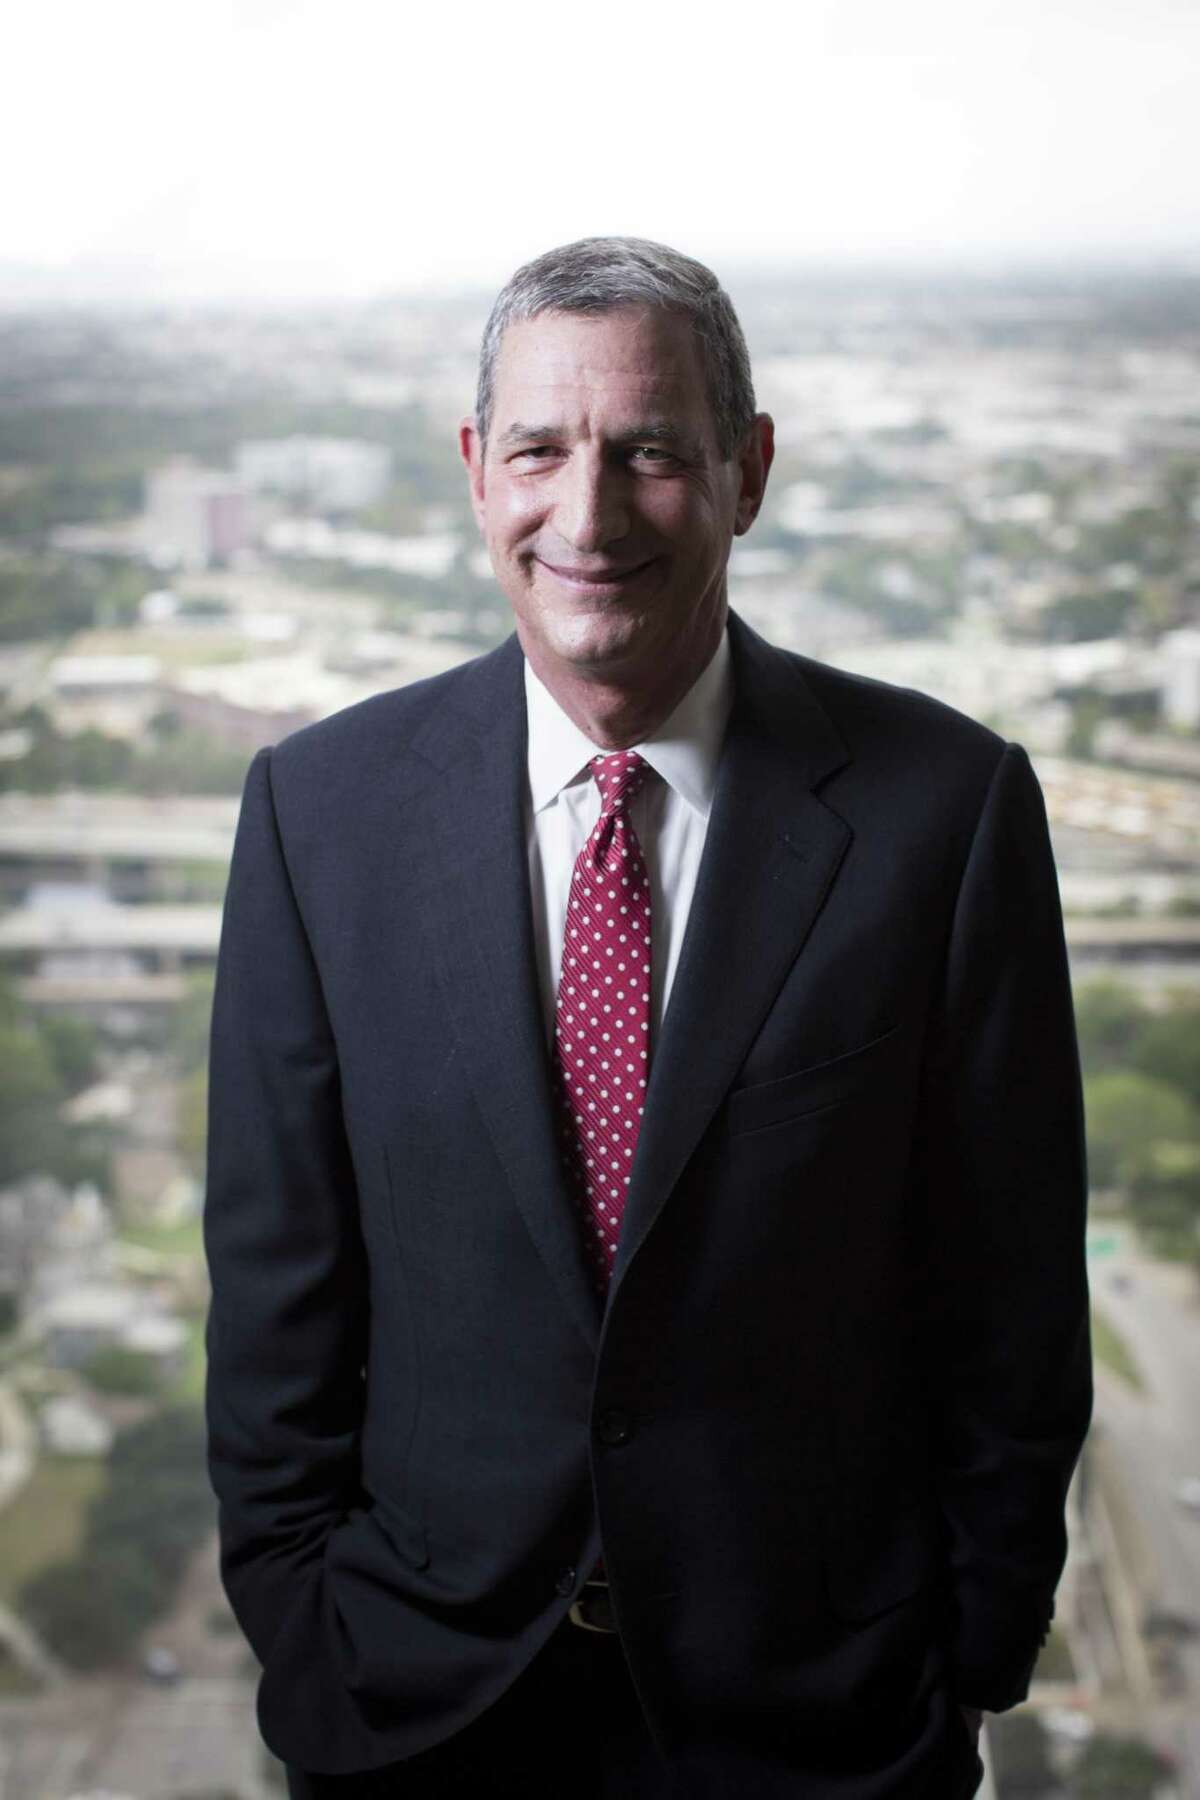 Andy Baker, managing partner of Houston-based Baker Botts, says it is no surprise that out-of-state firms continue to have interest in Texas and predicts there will be more firm mergers.